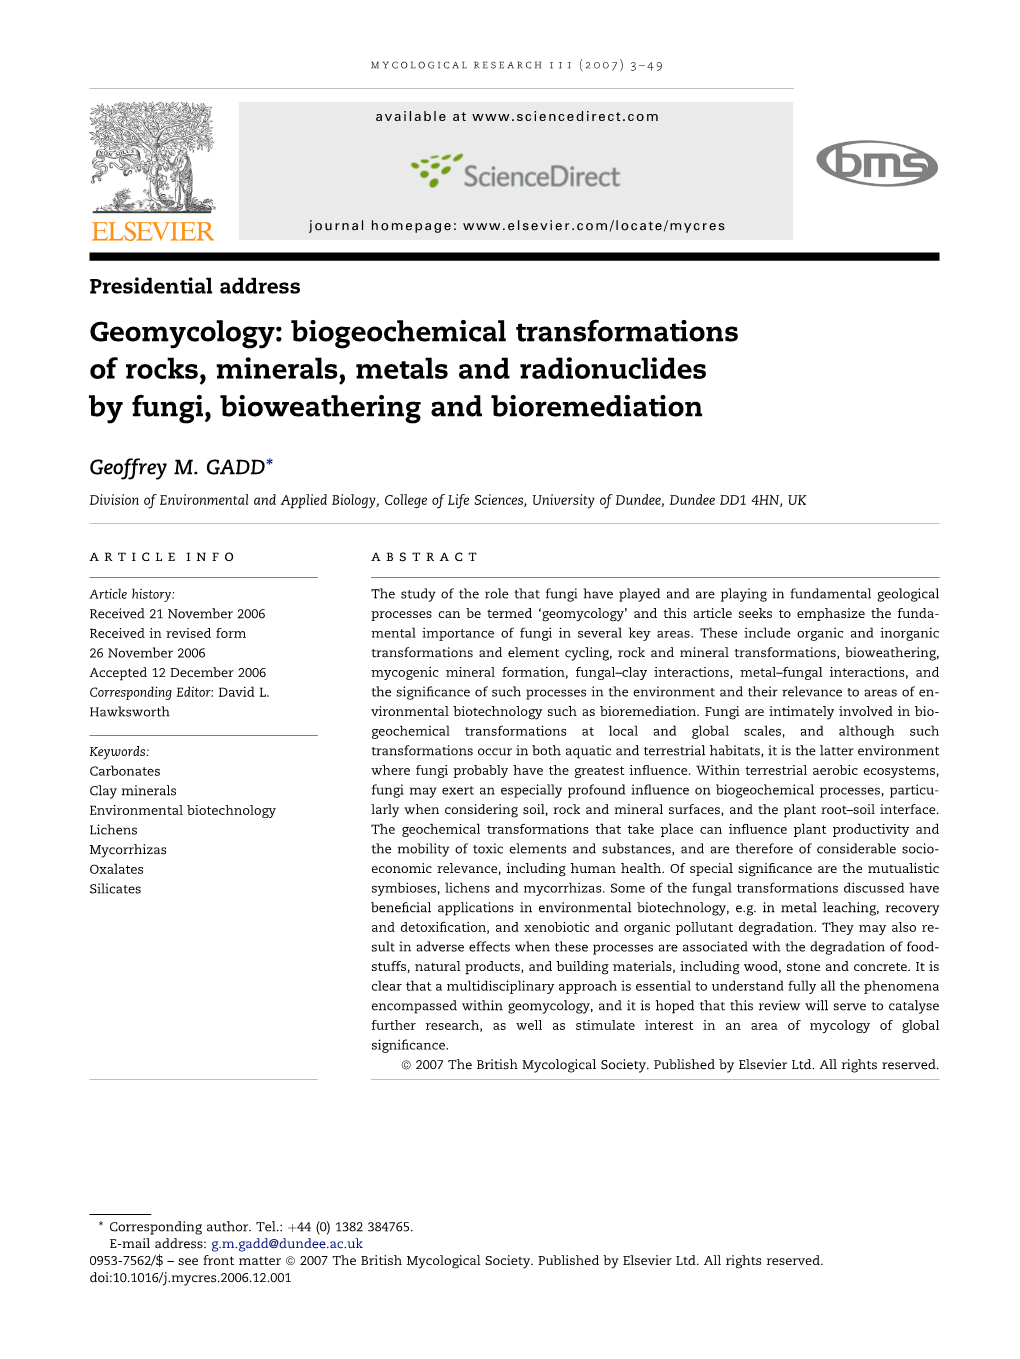 Geomycology: Biogeochemical Transformations of Rocks, Minerals, Metals and Radionuclides by Fungi, Bioweathering and Bioremediation